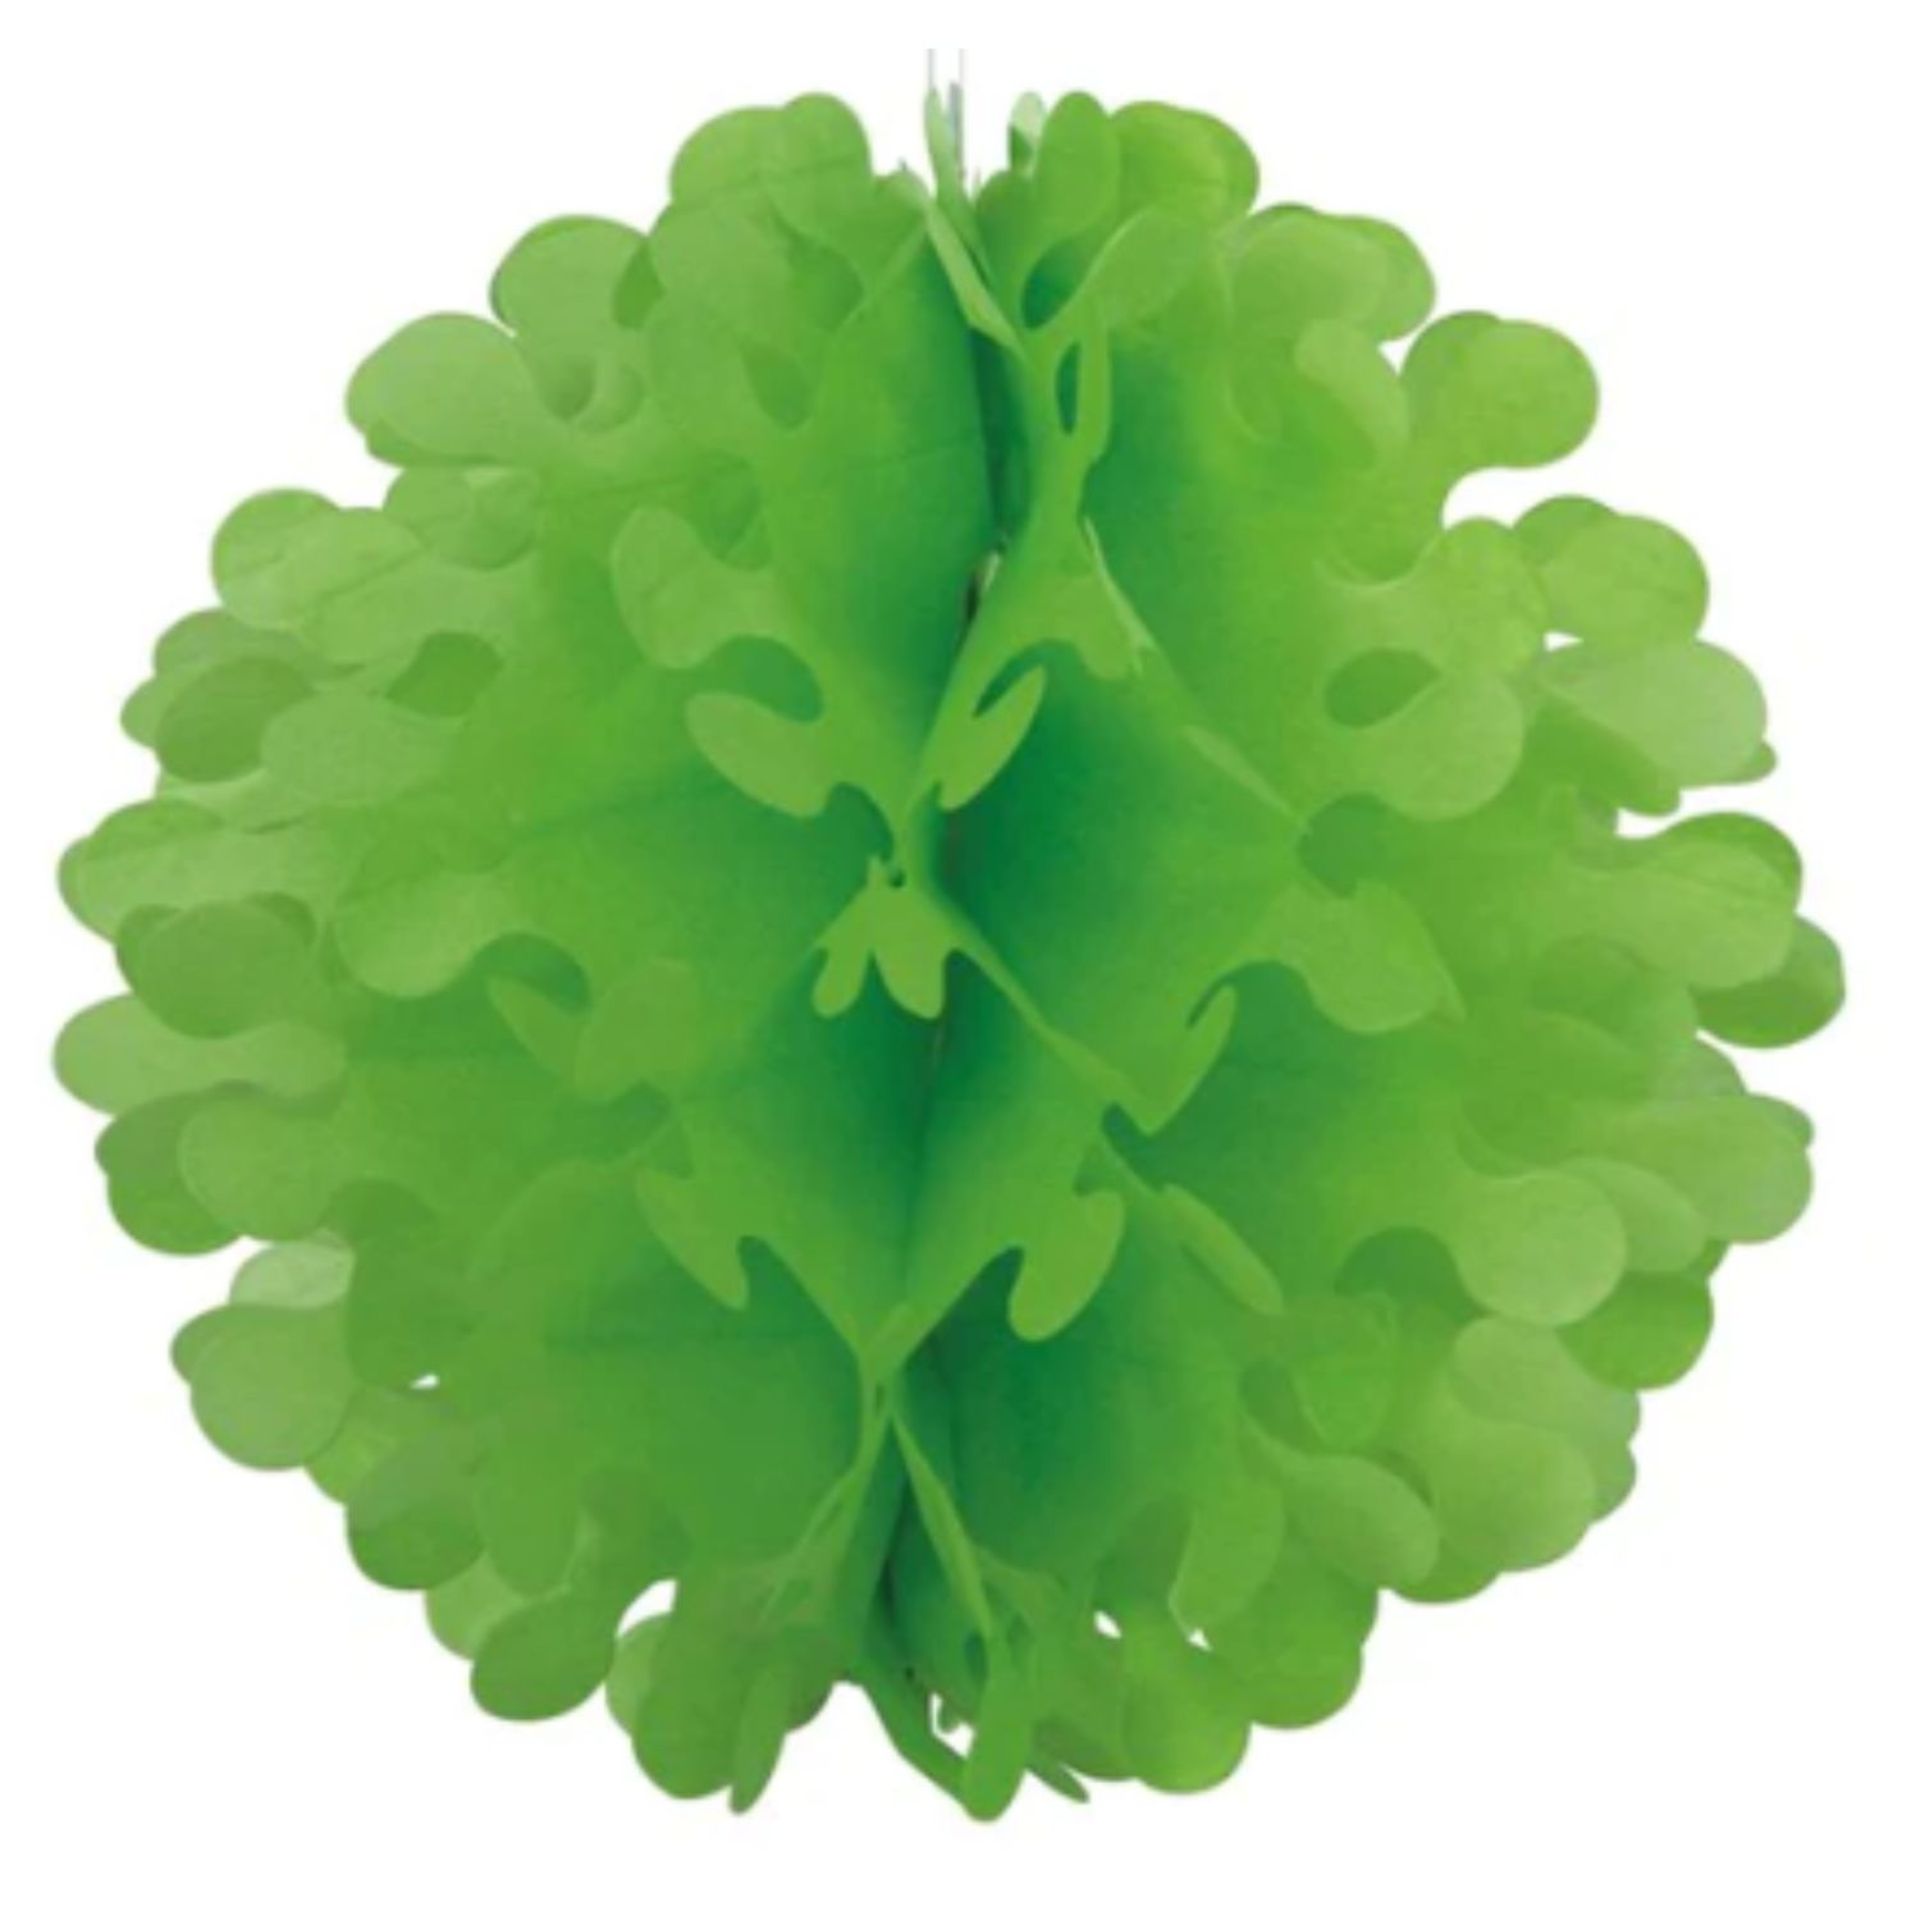 1000 PARTY SUPPLIES 12" FLUTTER TISSUE PAPER BALL - RANGE OF COLOURS, RRP £10,000 - Image 2 of 9